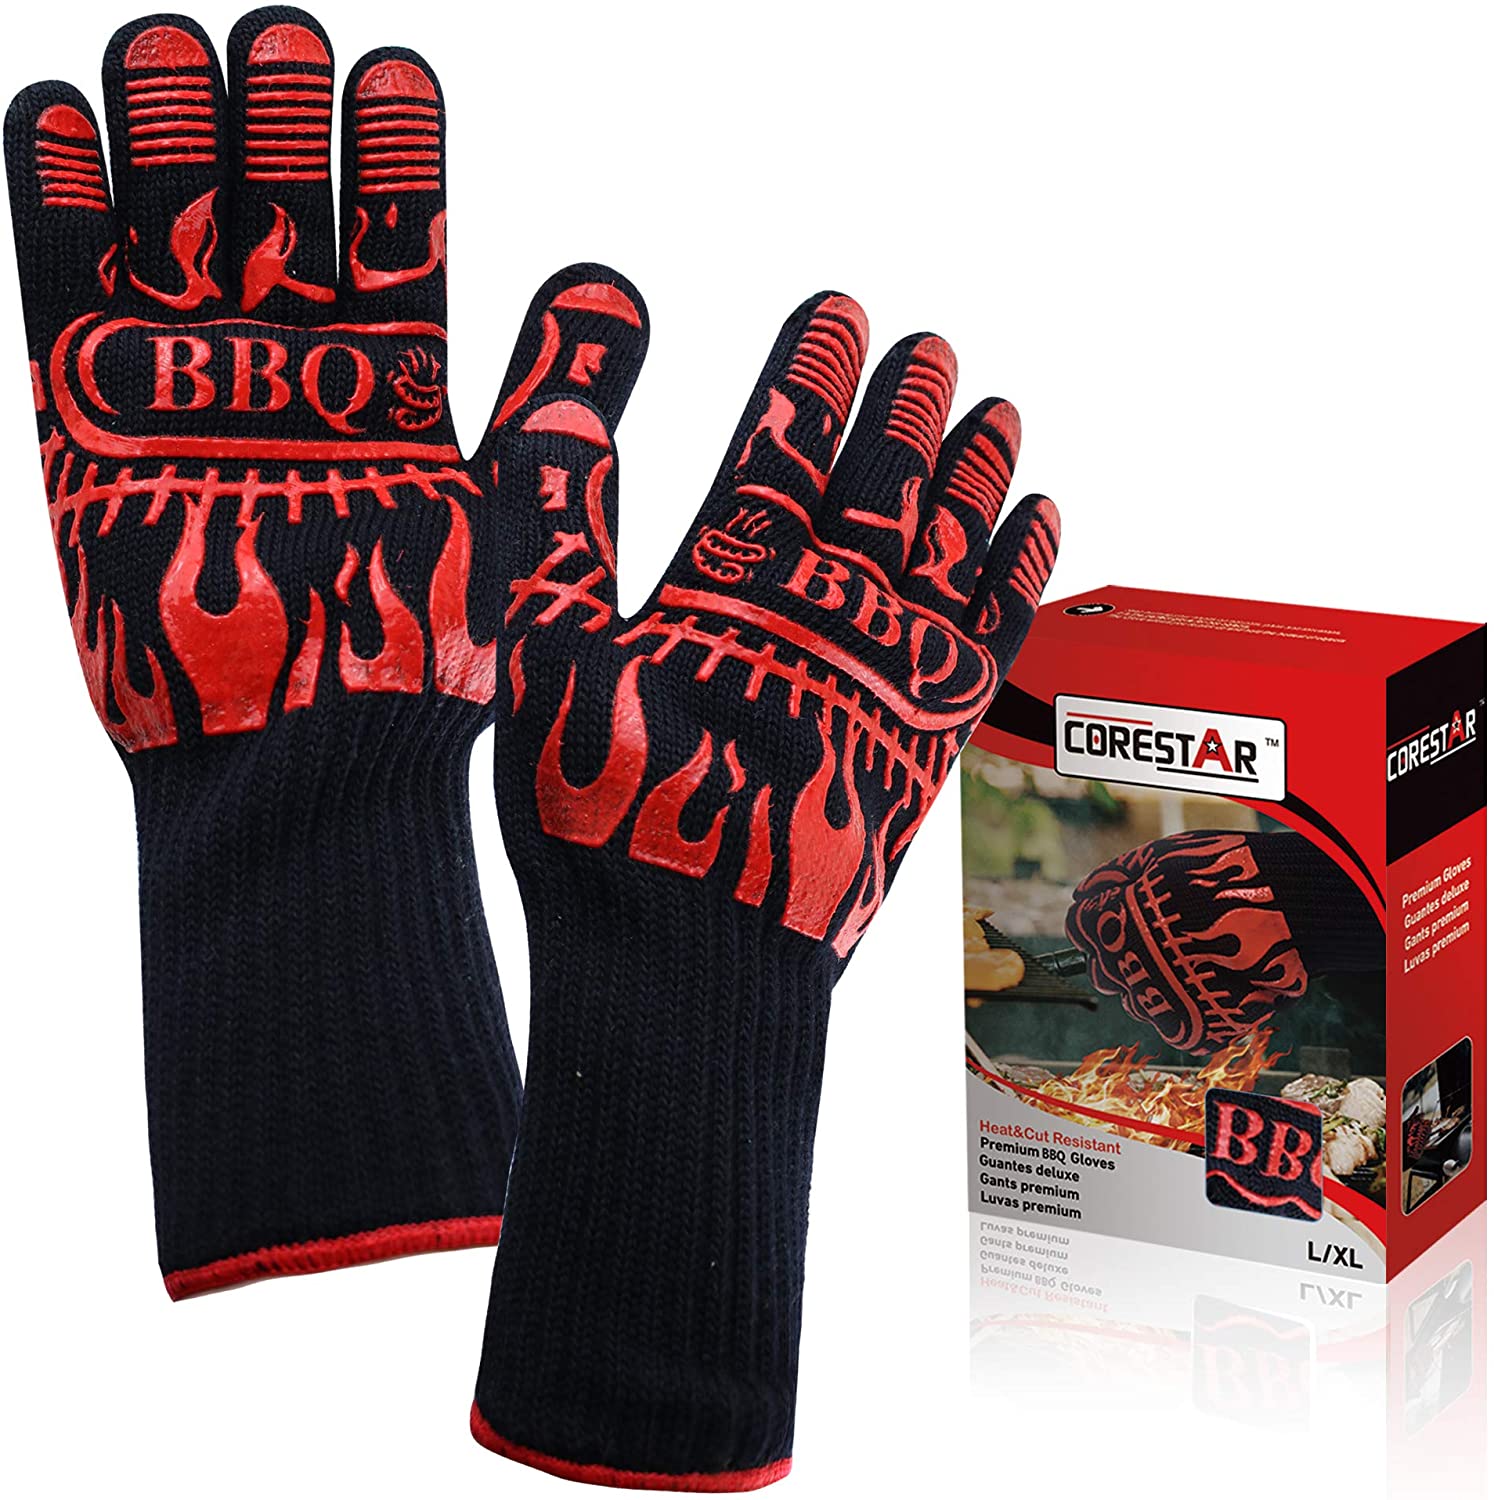 BBQ Grill Gloves, Premium Extreme Heat Resistant Up to 932℉, Great